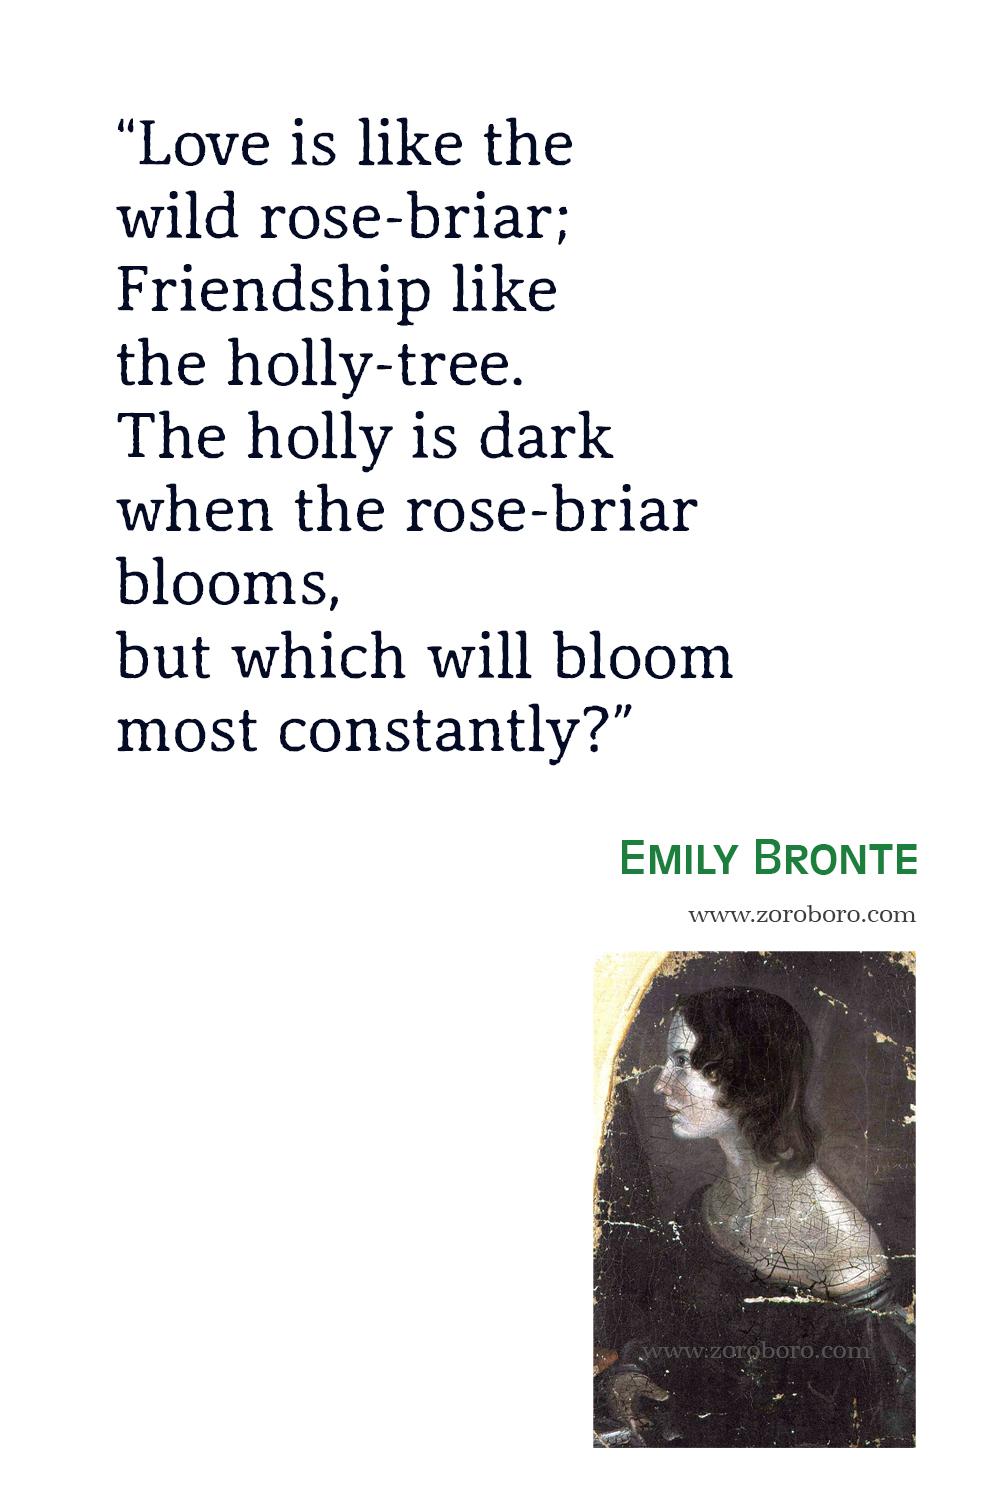 Emily Brontë Quotes, Emily Bronte Wuthering Heights Quotes, Emily Bronte Poem, Emily Bronte Books Quotes, Emily Bronte Poetry, Emily Bronte